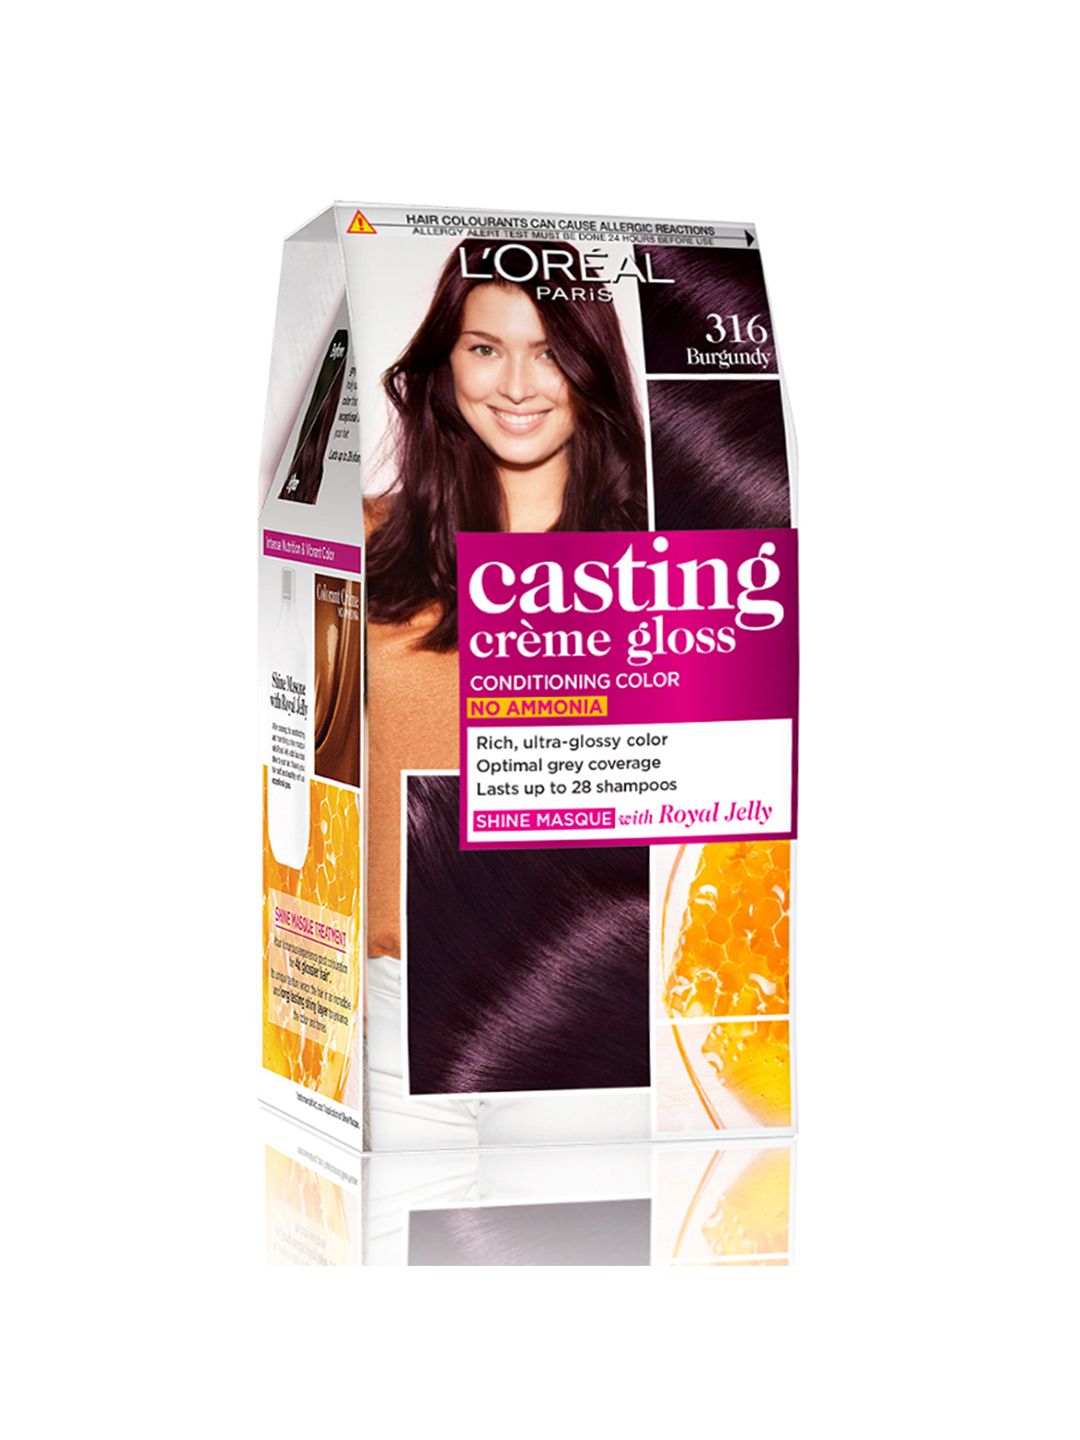 LOreal Paris Casting Creme Gloss Hair Color - 316 Burgundy 87.5g+72ml Price in India